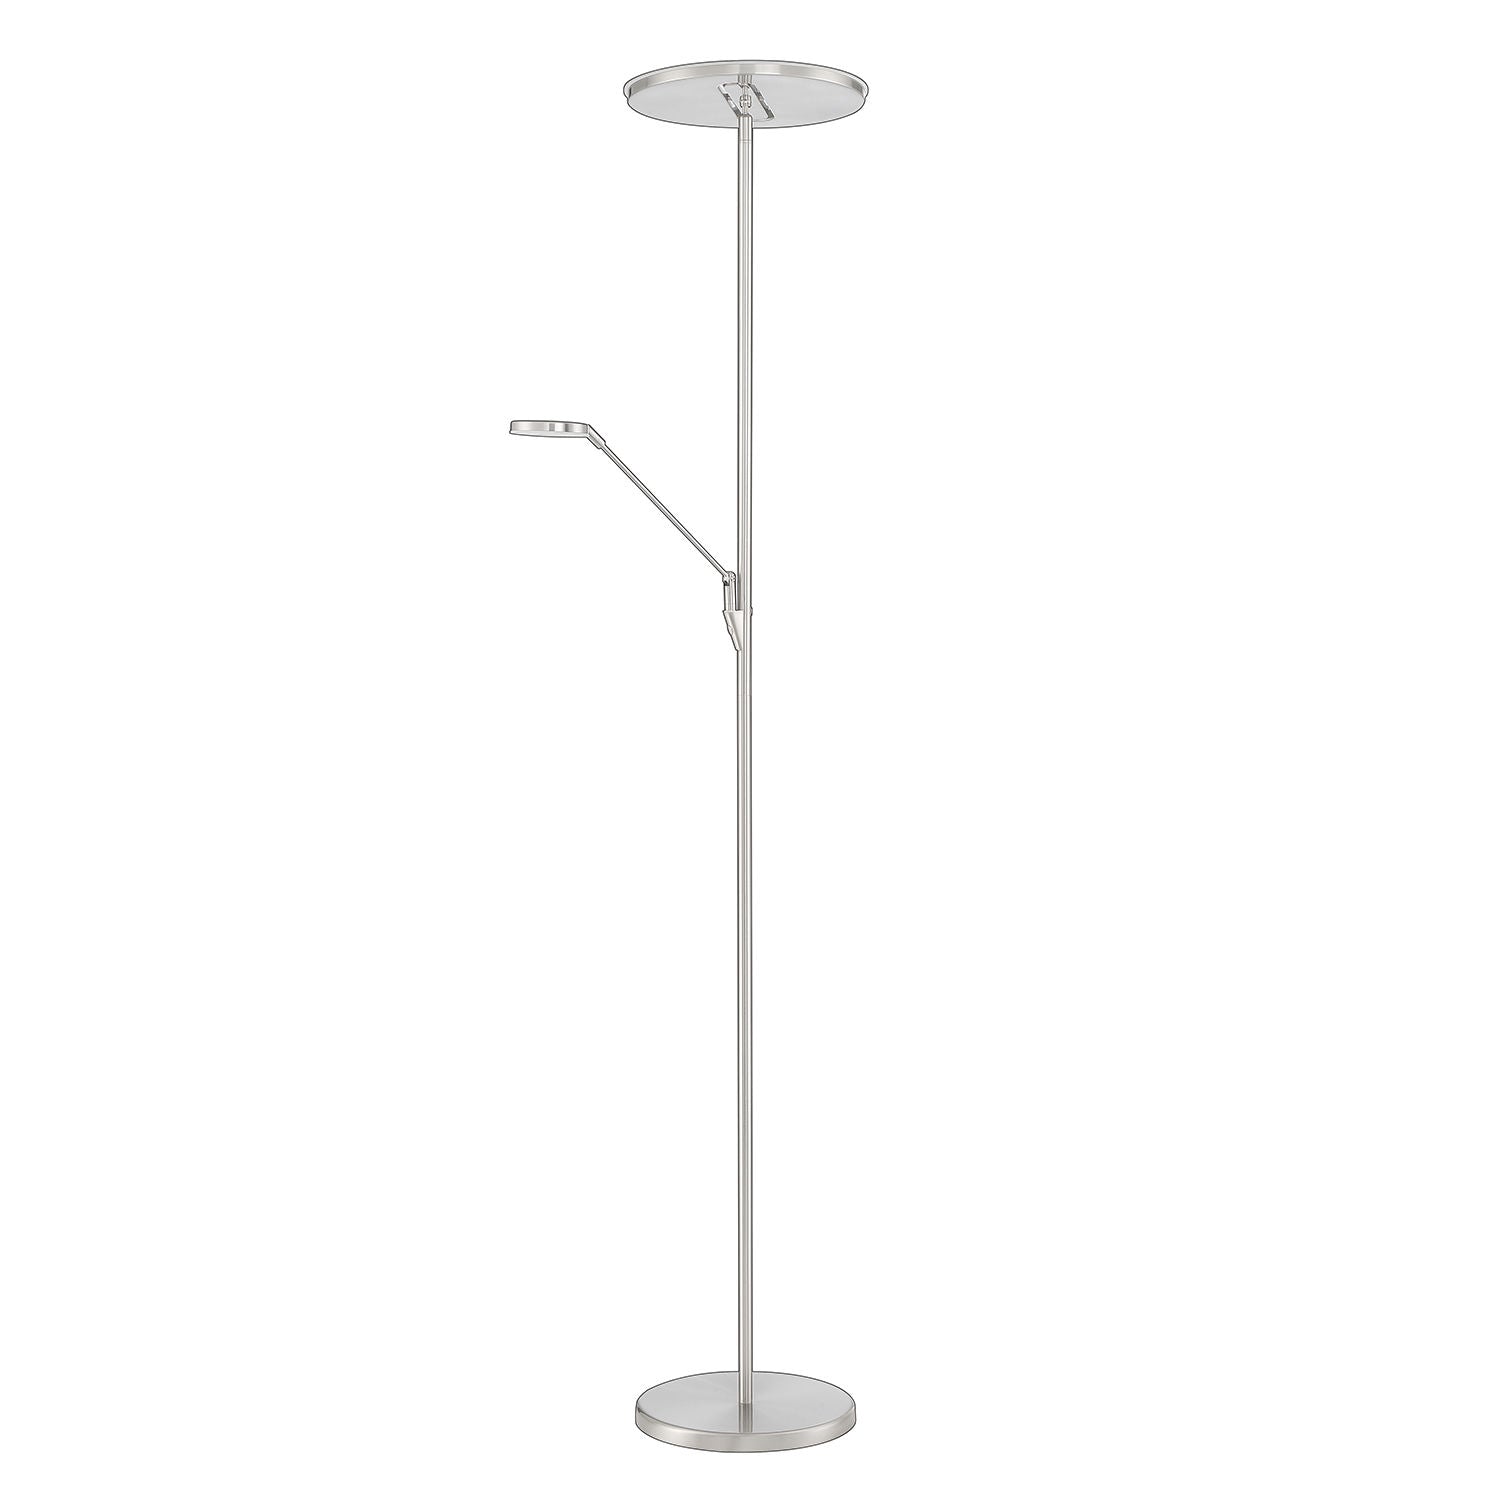 Floor lamp Stainless steel INTEGRATED LED - TC5013-SN | KENDAL